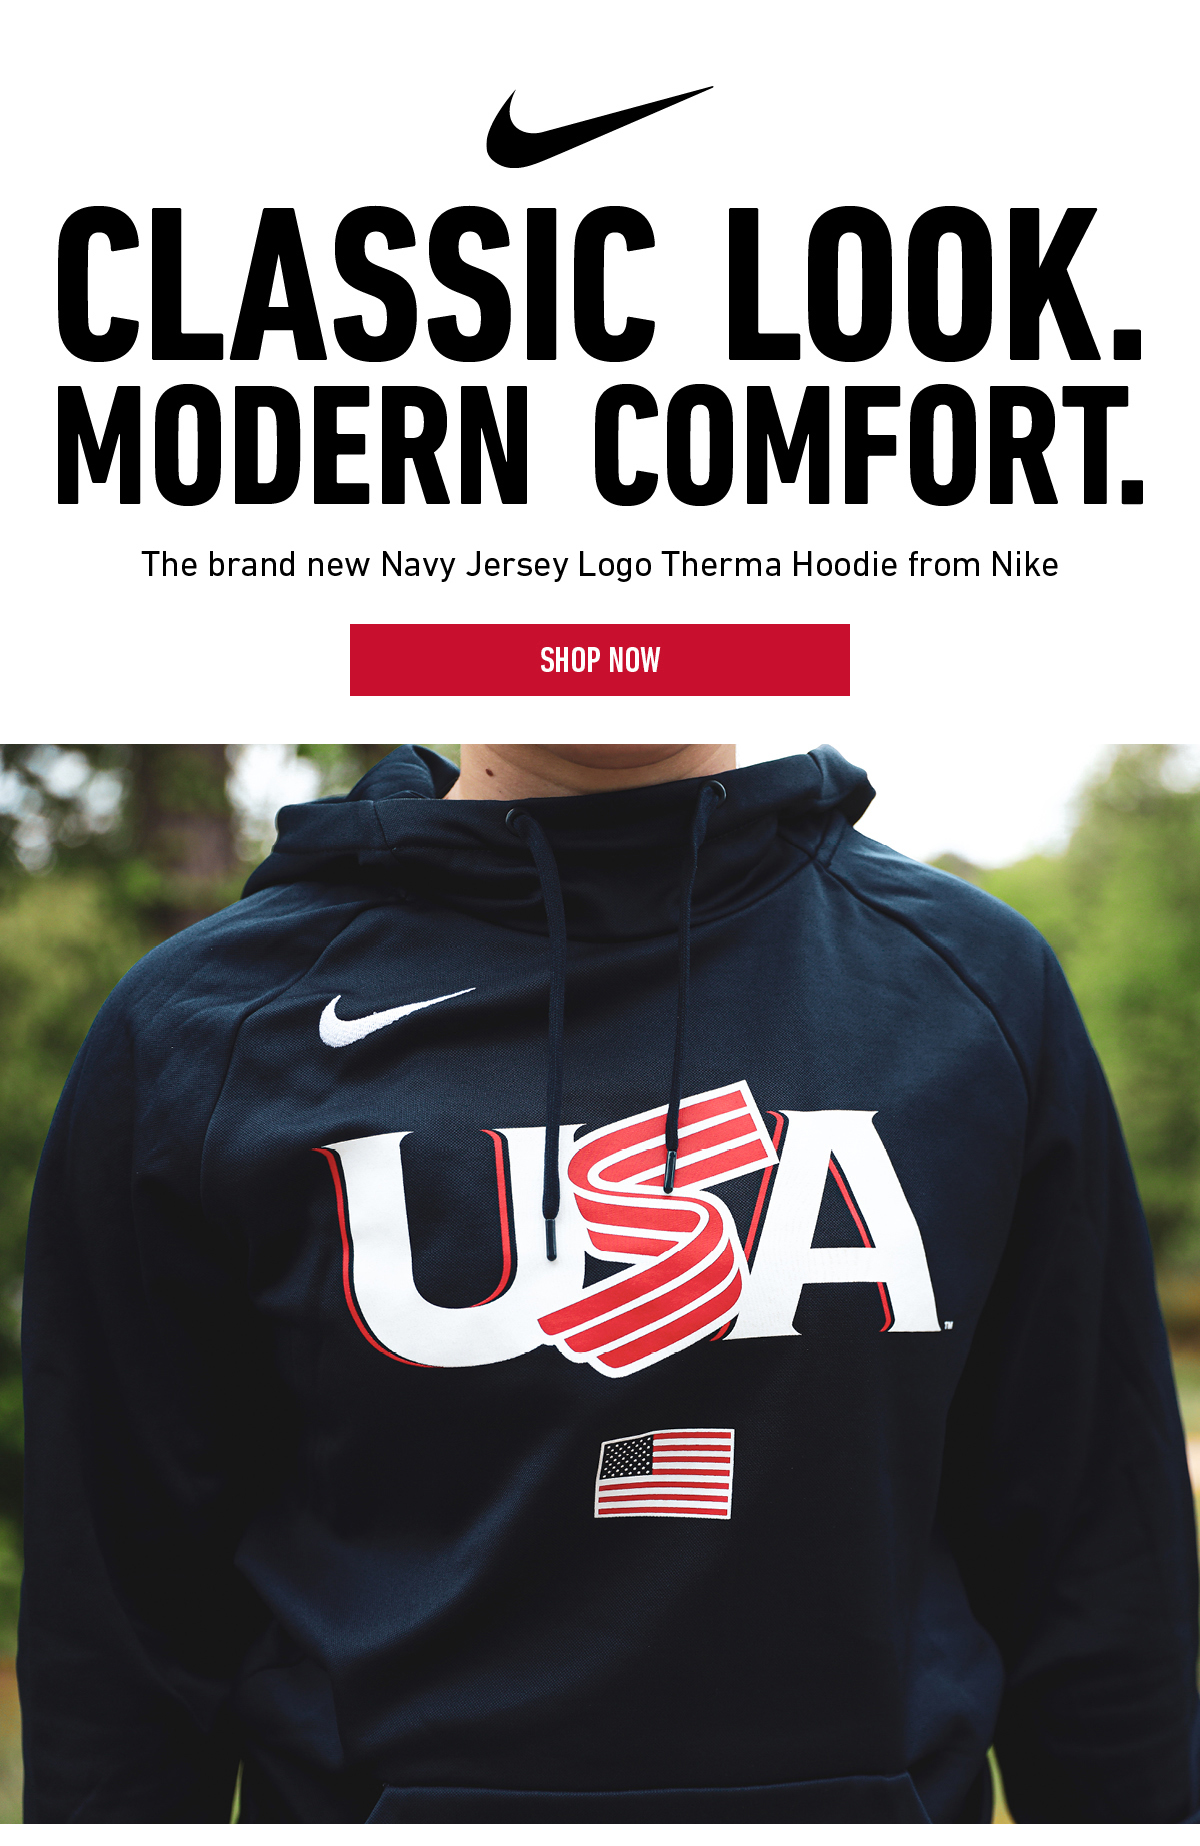 The new Navy Jersey Logo Therma Hoodie